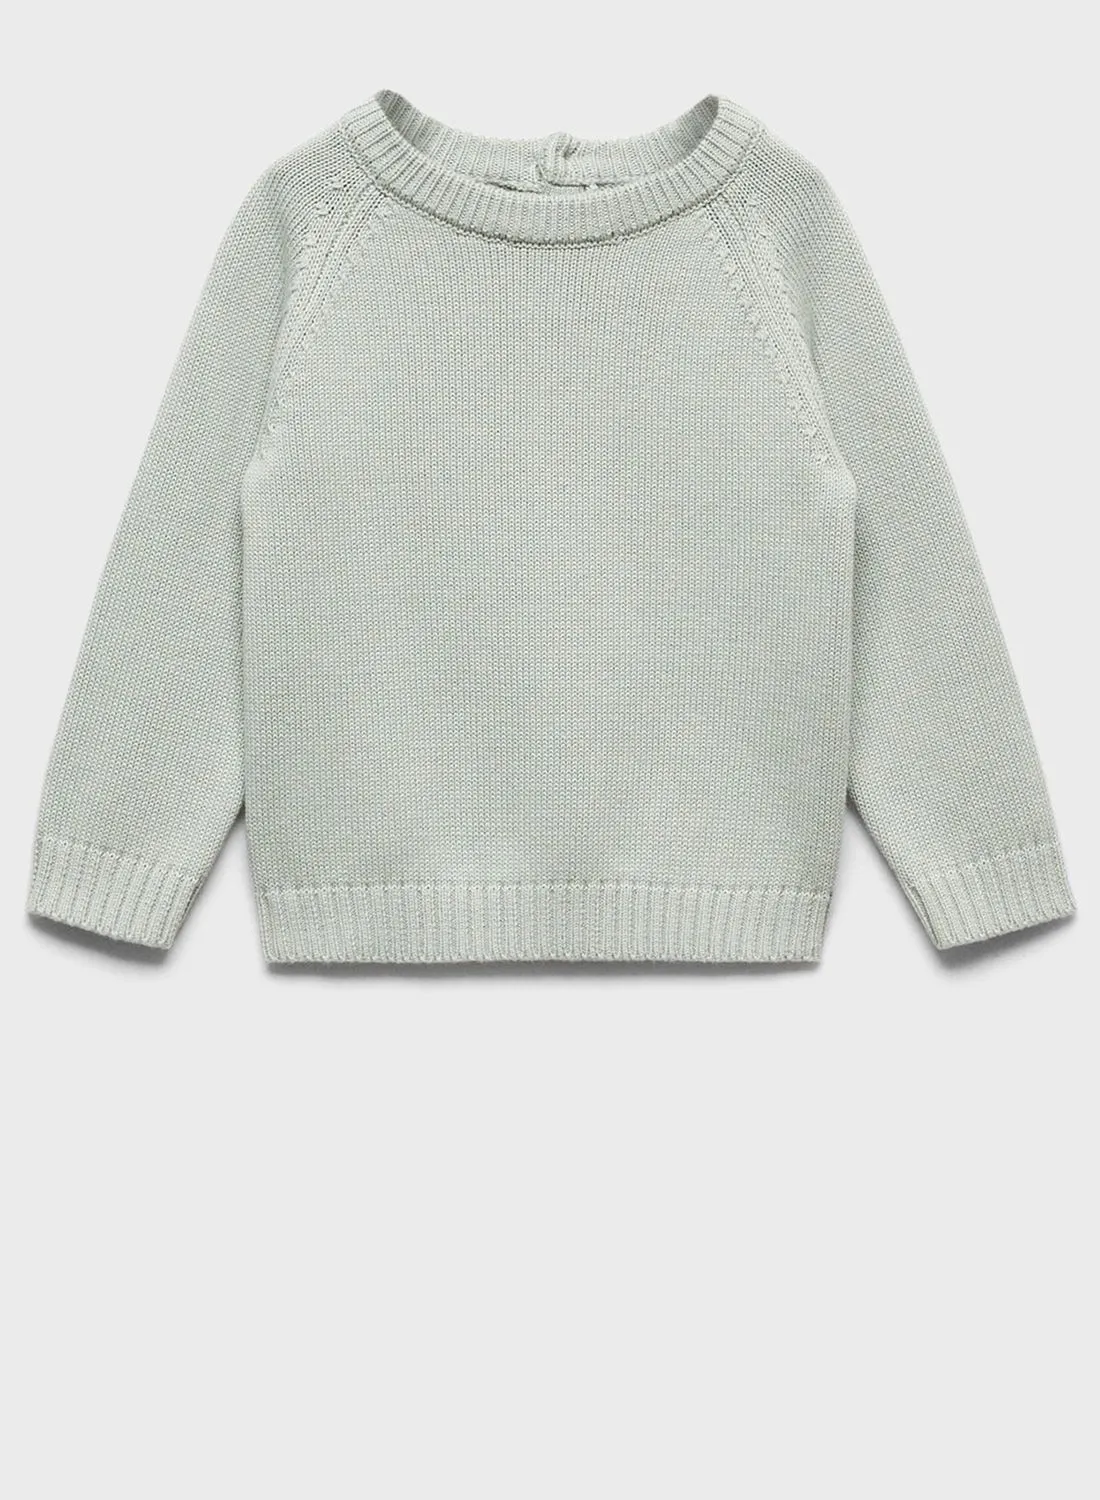 MANGO Infant Knitted Sweater